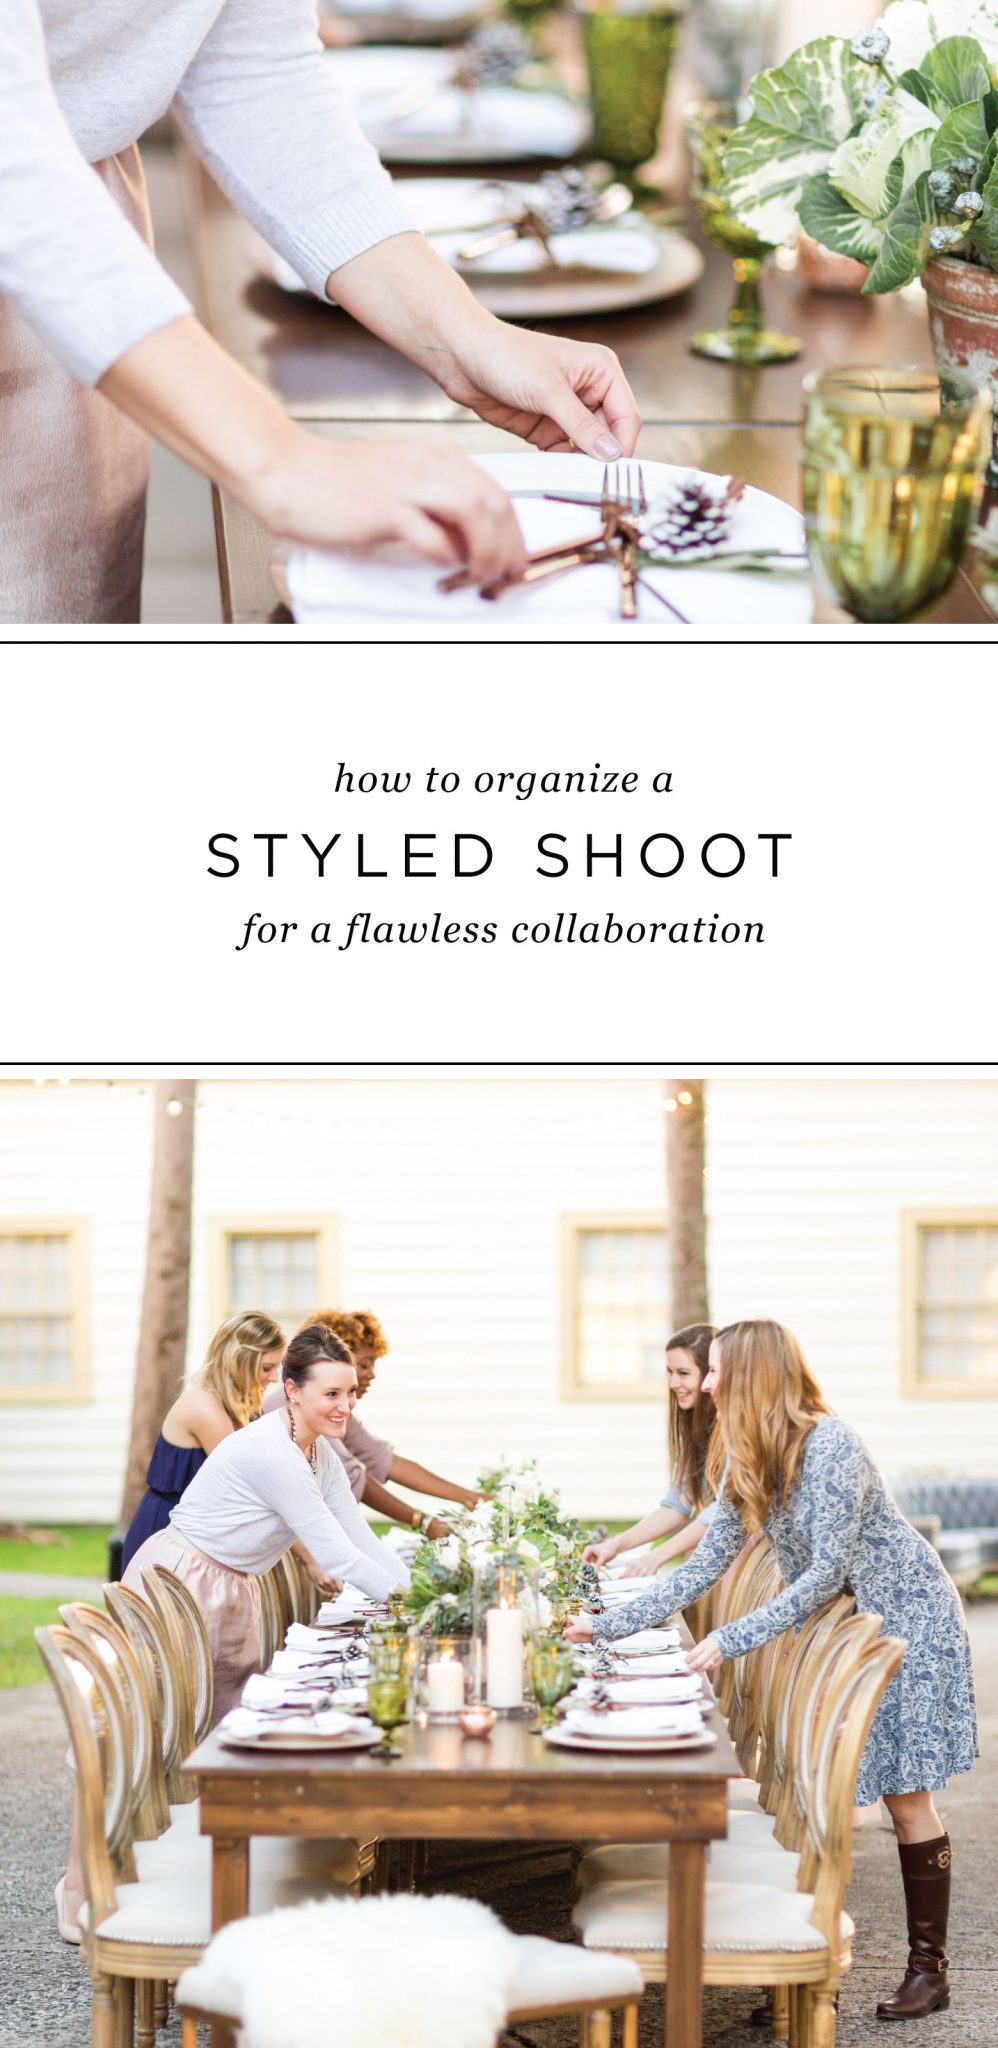 How to Organize a Styled Shoot to ensure a flawless creative collaboration!